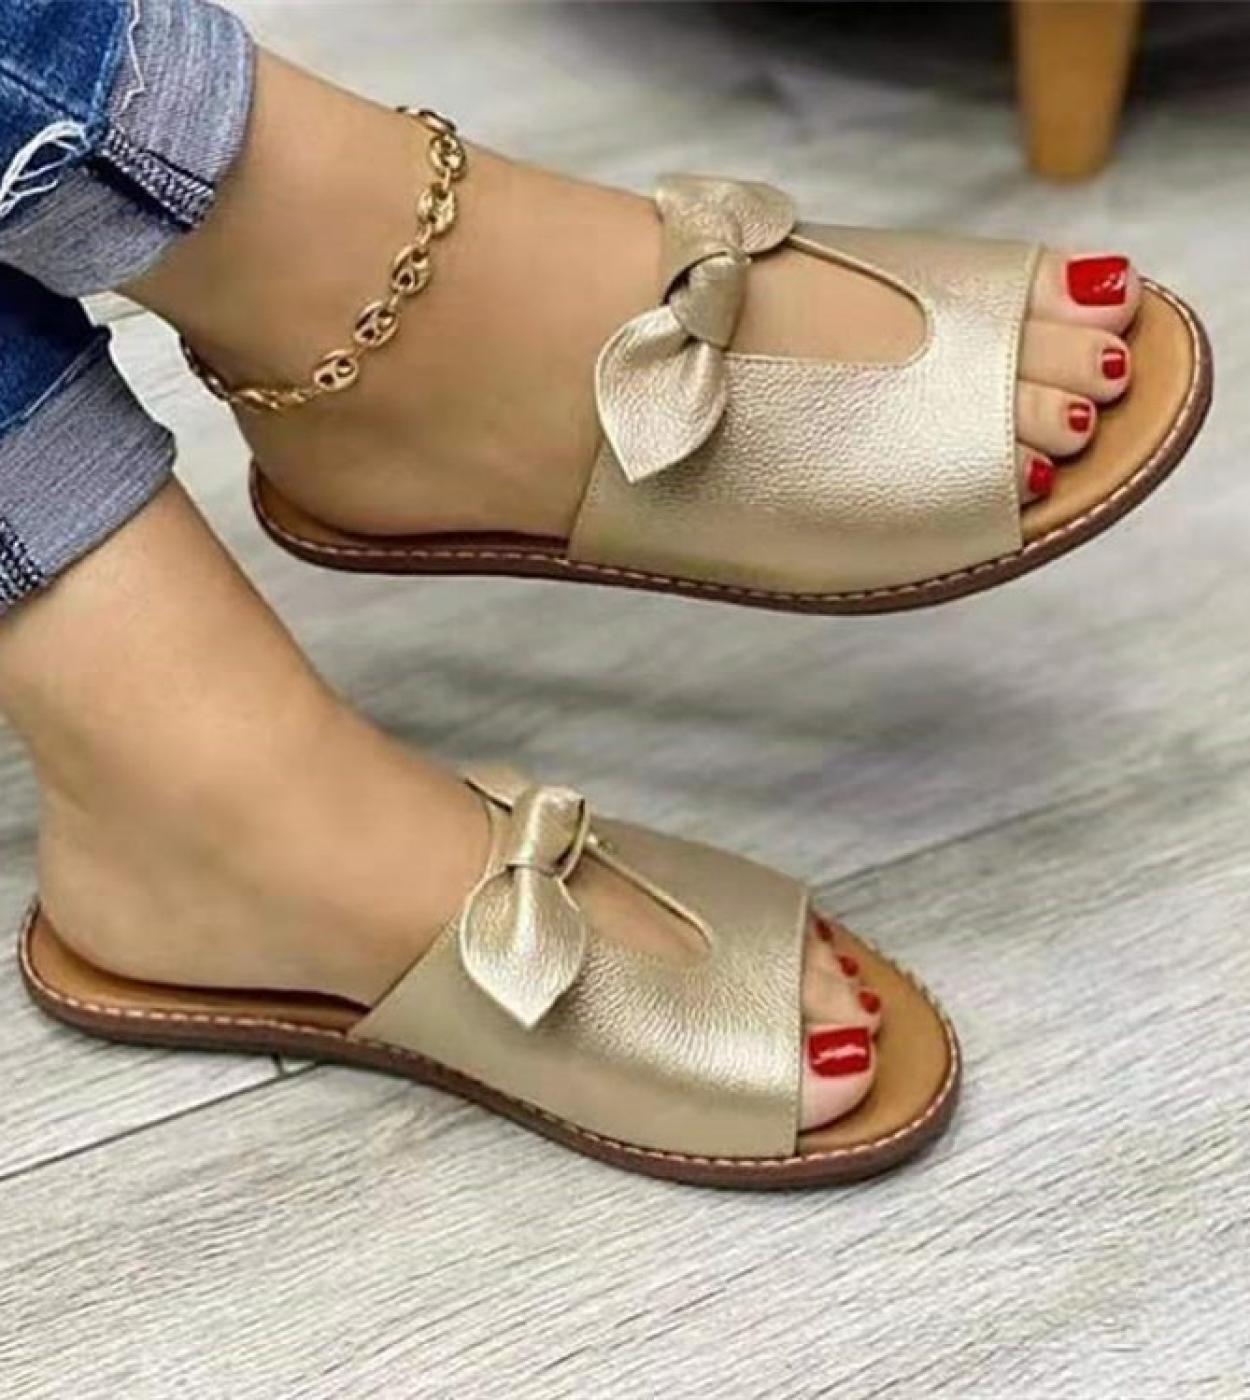  New Summer New Women Leisure Fashion Bow Flat Sandals Sandals Comfortable Soft Bottom Womens Breathable Beach Sandals